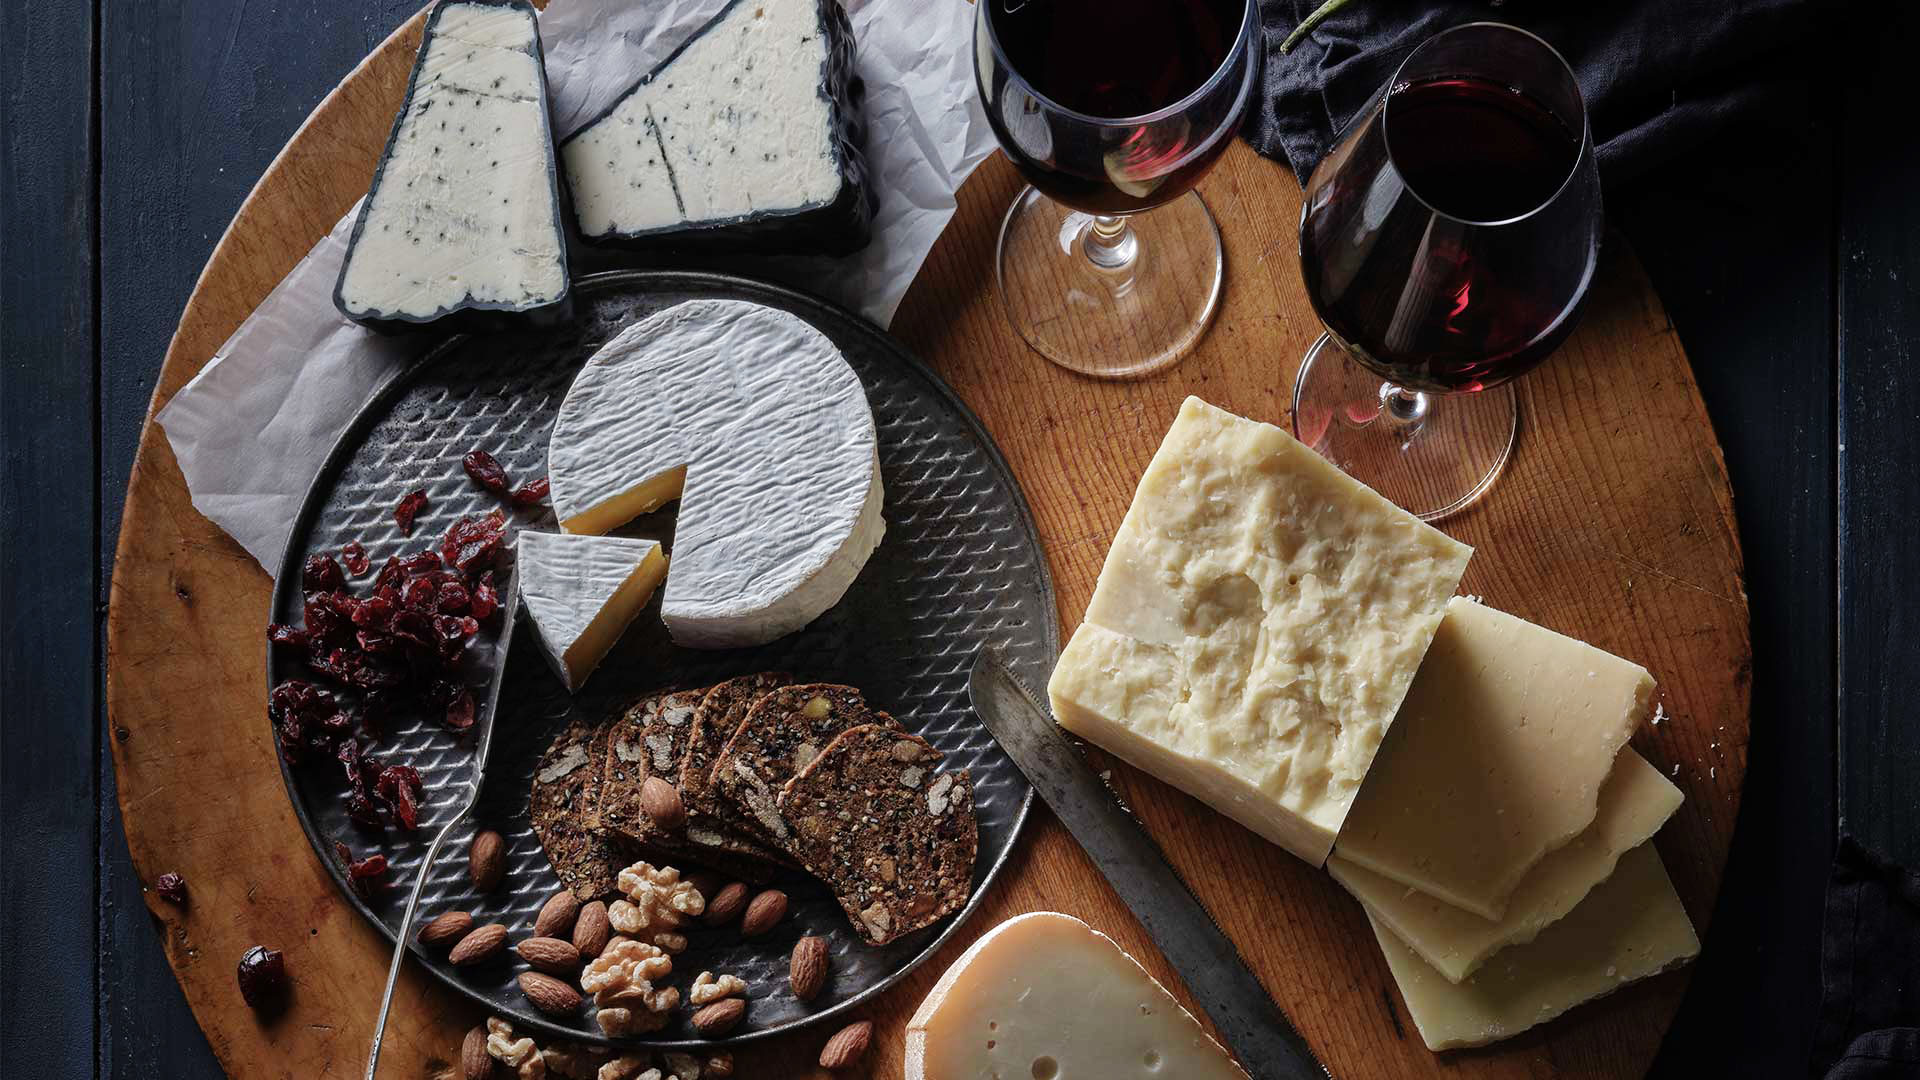 Over head shot of a round serving board with various types of artisanal cheeses and two glasses of wine.